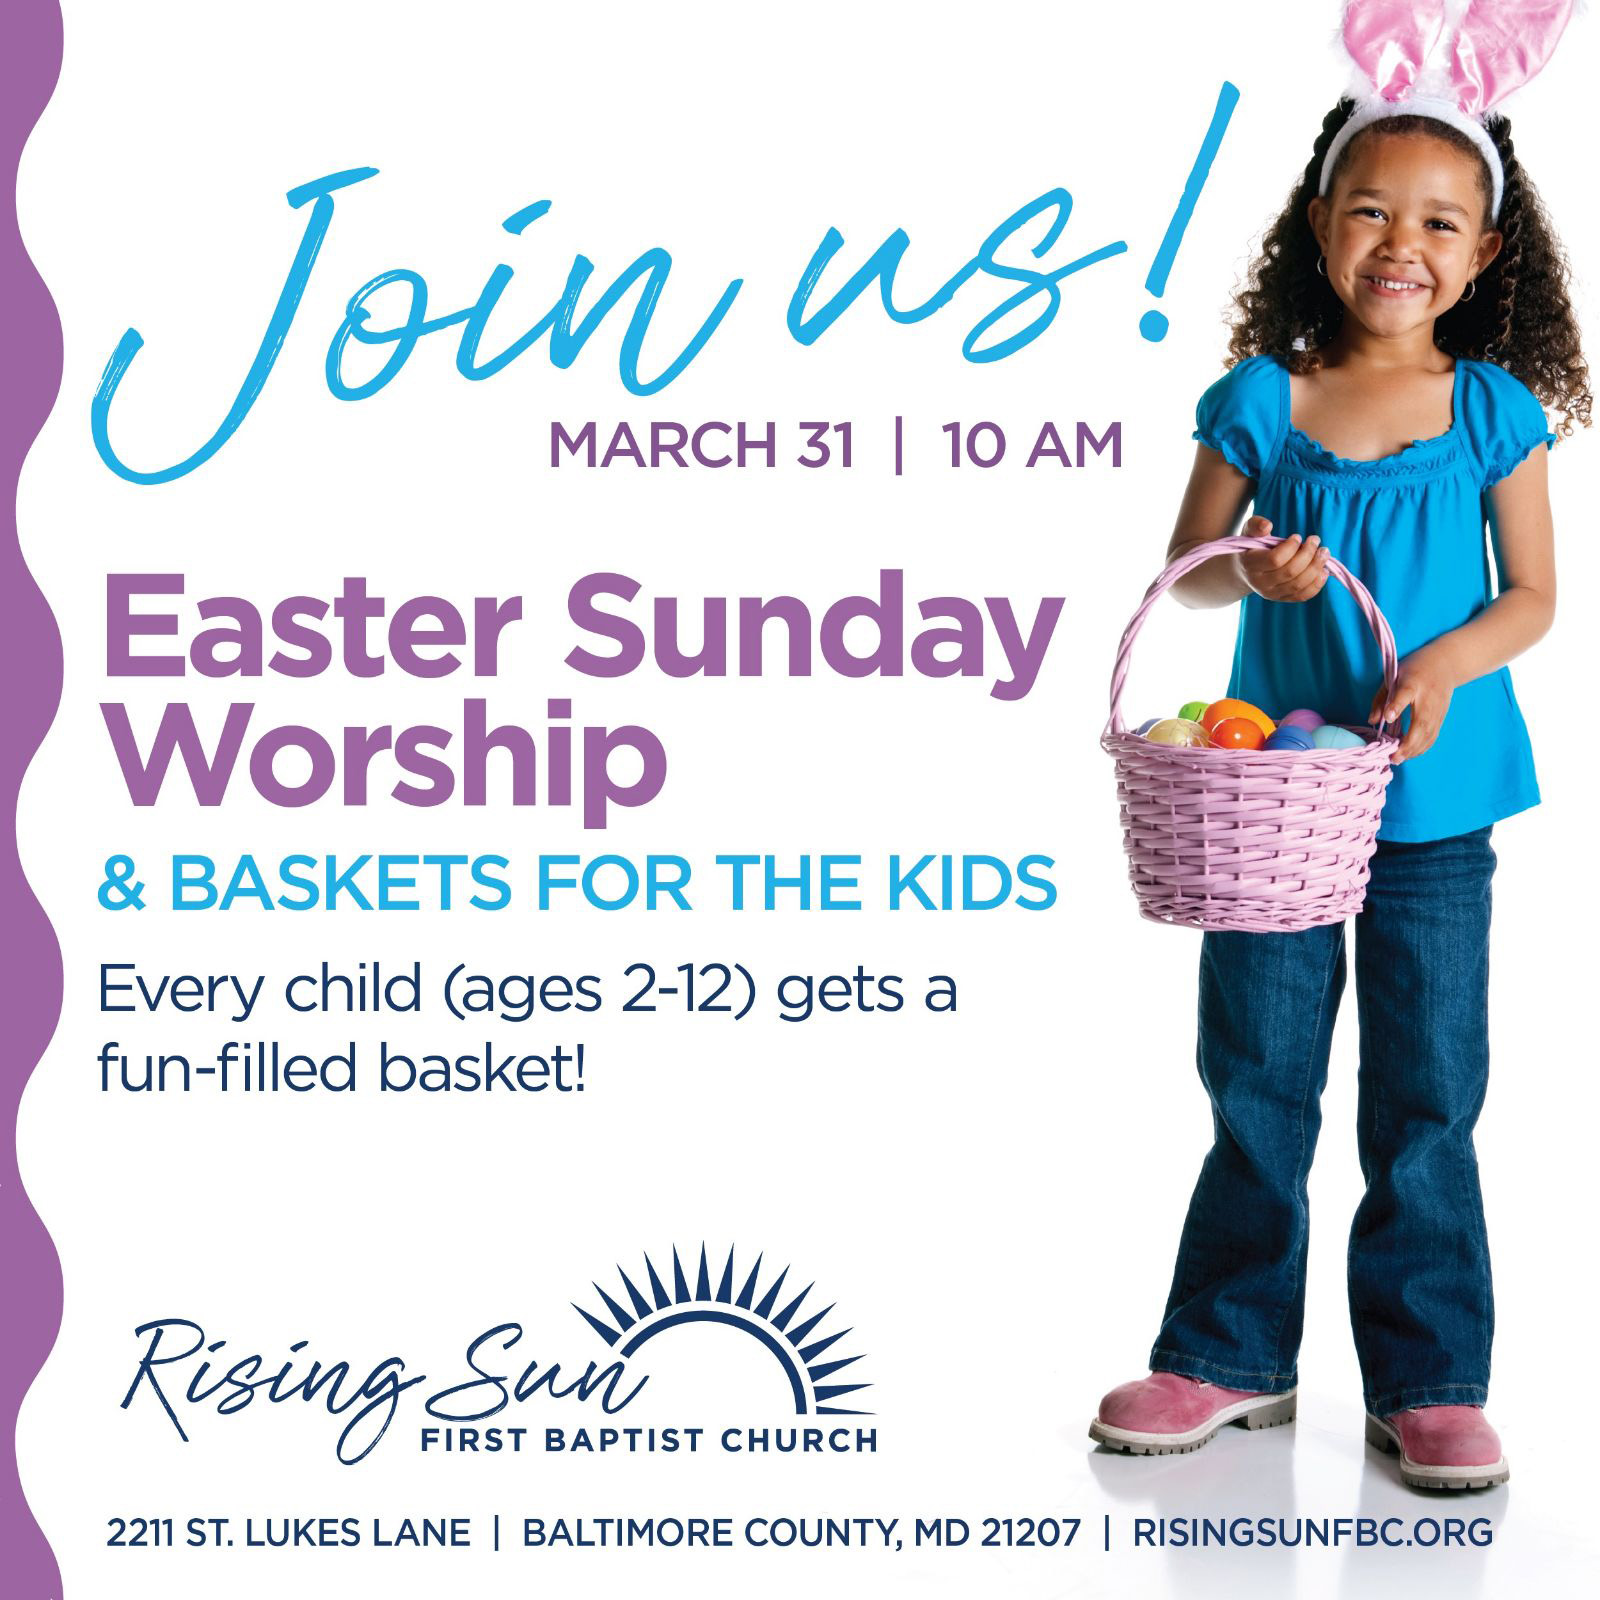 RSFBC Family Join us! March 31st at 10 AM for Easter Sunday Worship & Baskets for the Kids Every child (ages 2-12) gets a fun-filled basket!